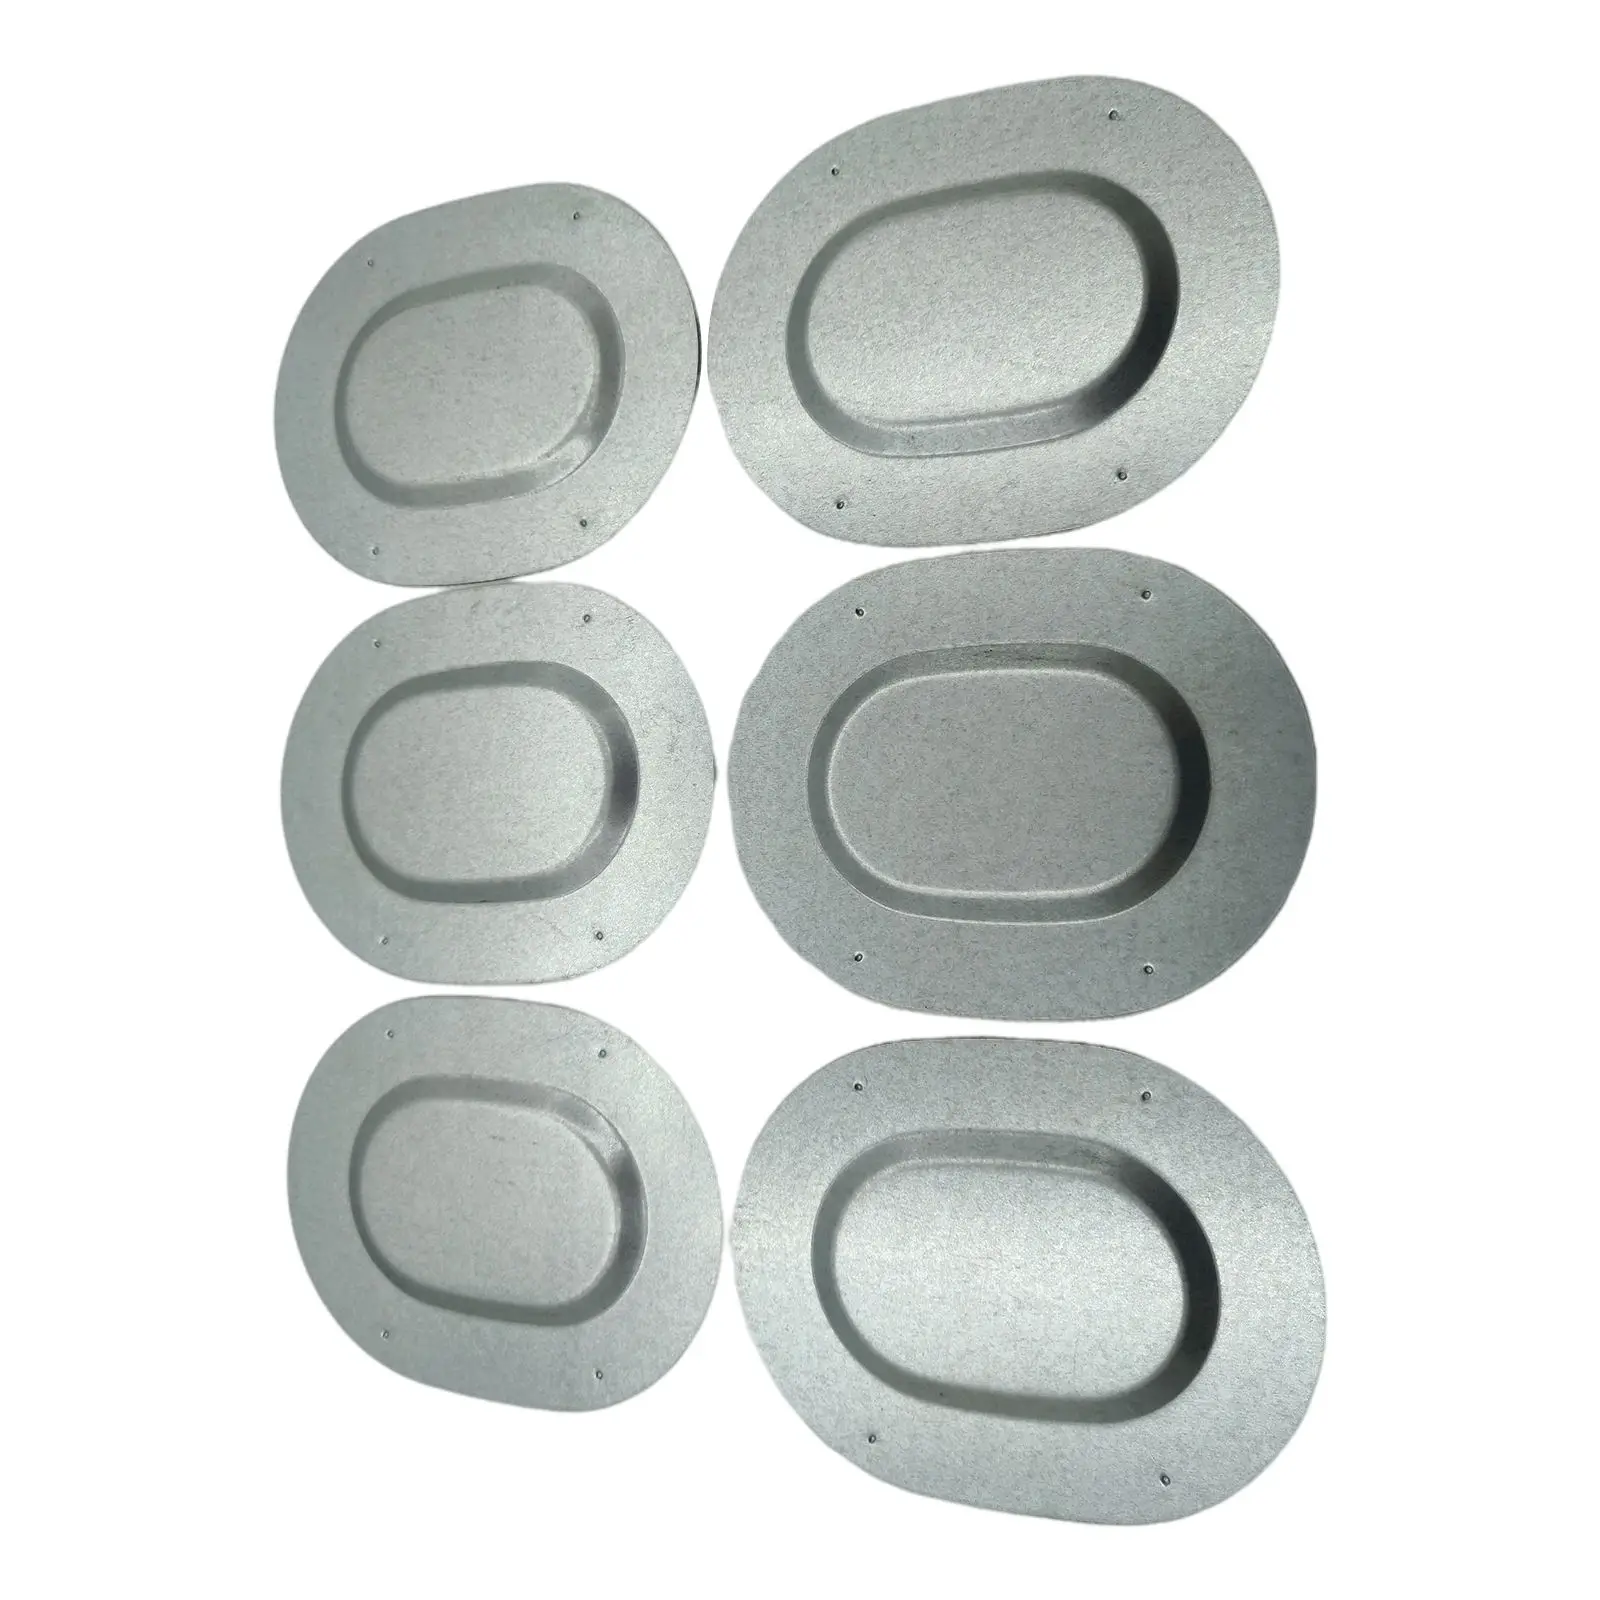 6Pcs Trunk Floor Pan Drain Plugs Set Floor and Trunk Pan Body Metal Automotive Replacement Parts Fit for Chevelle A-Body